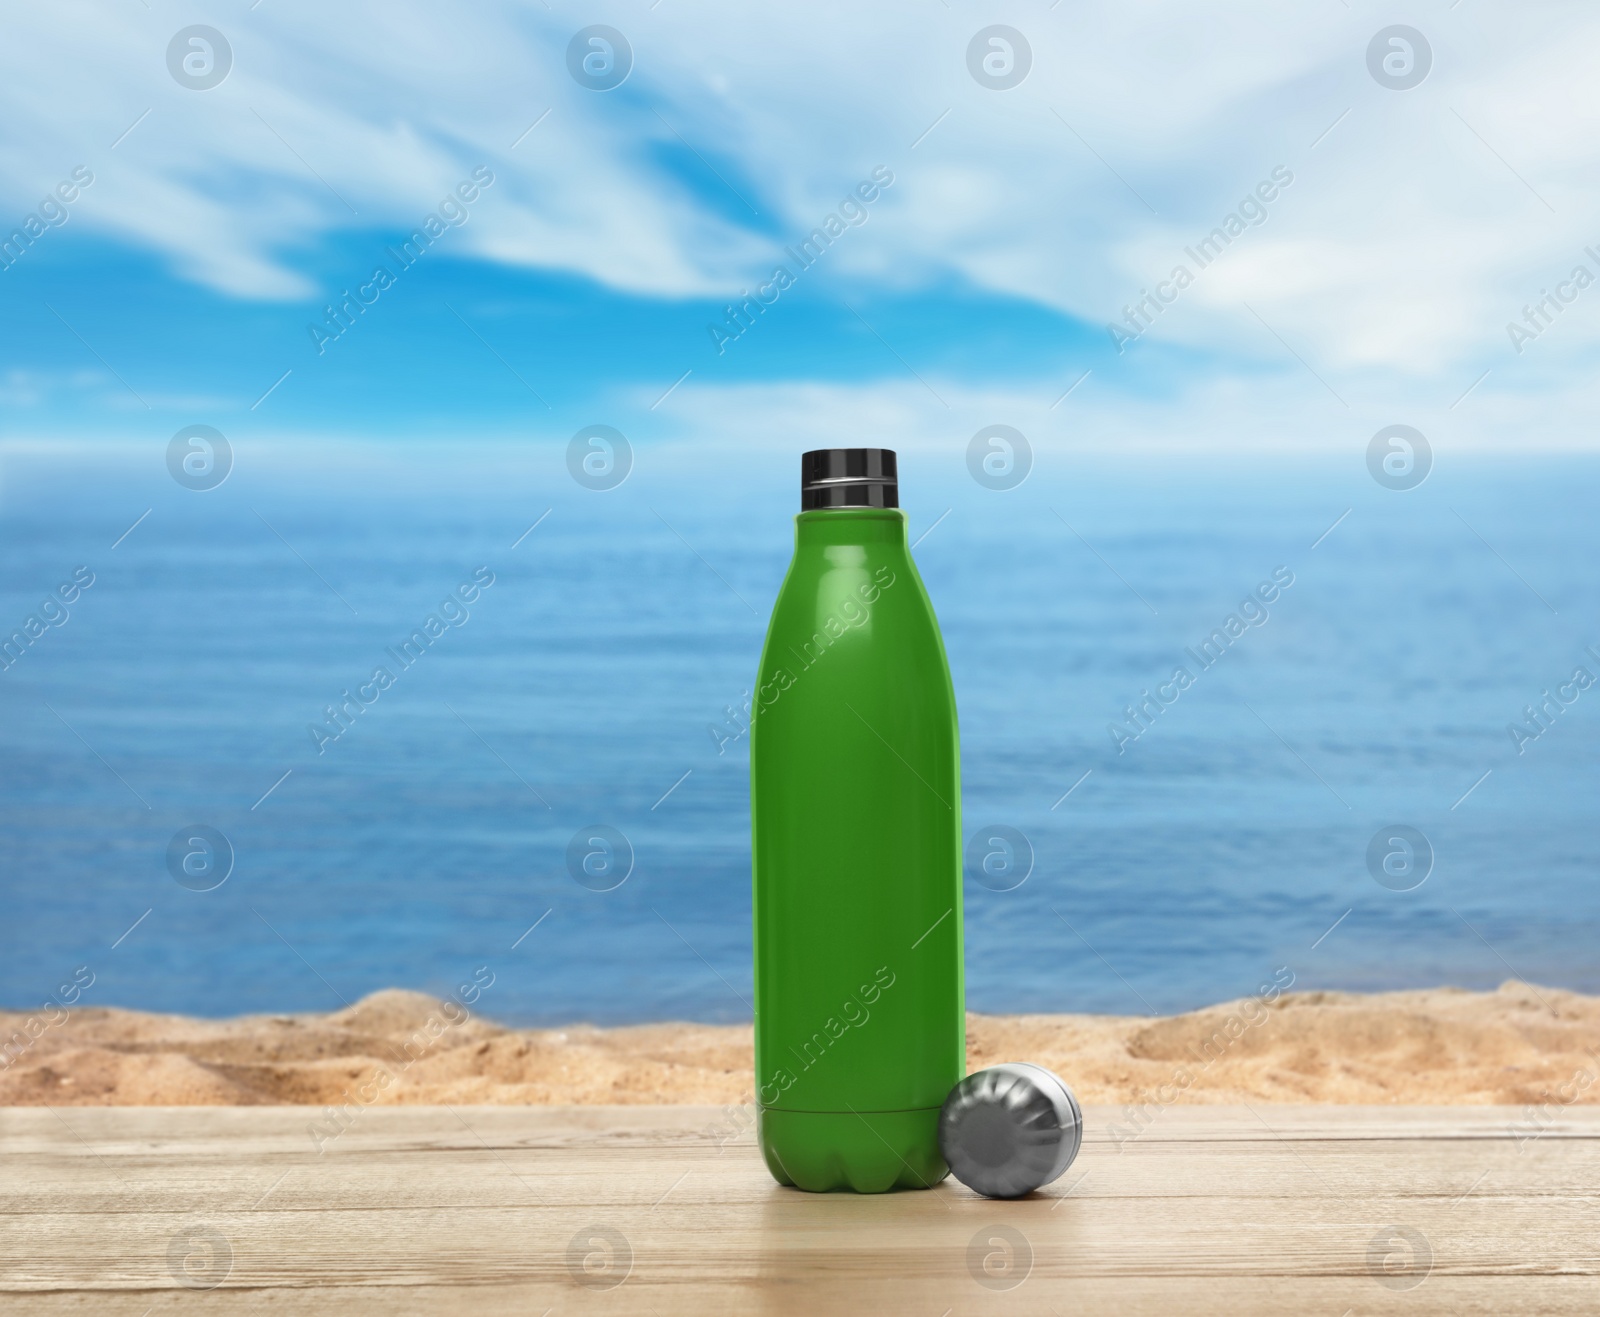 Image of Thermo bottle on wooden table near sea under blue sky